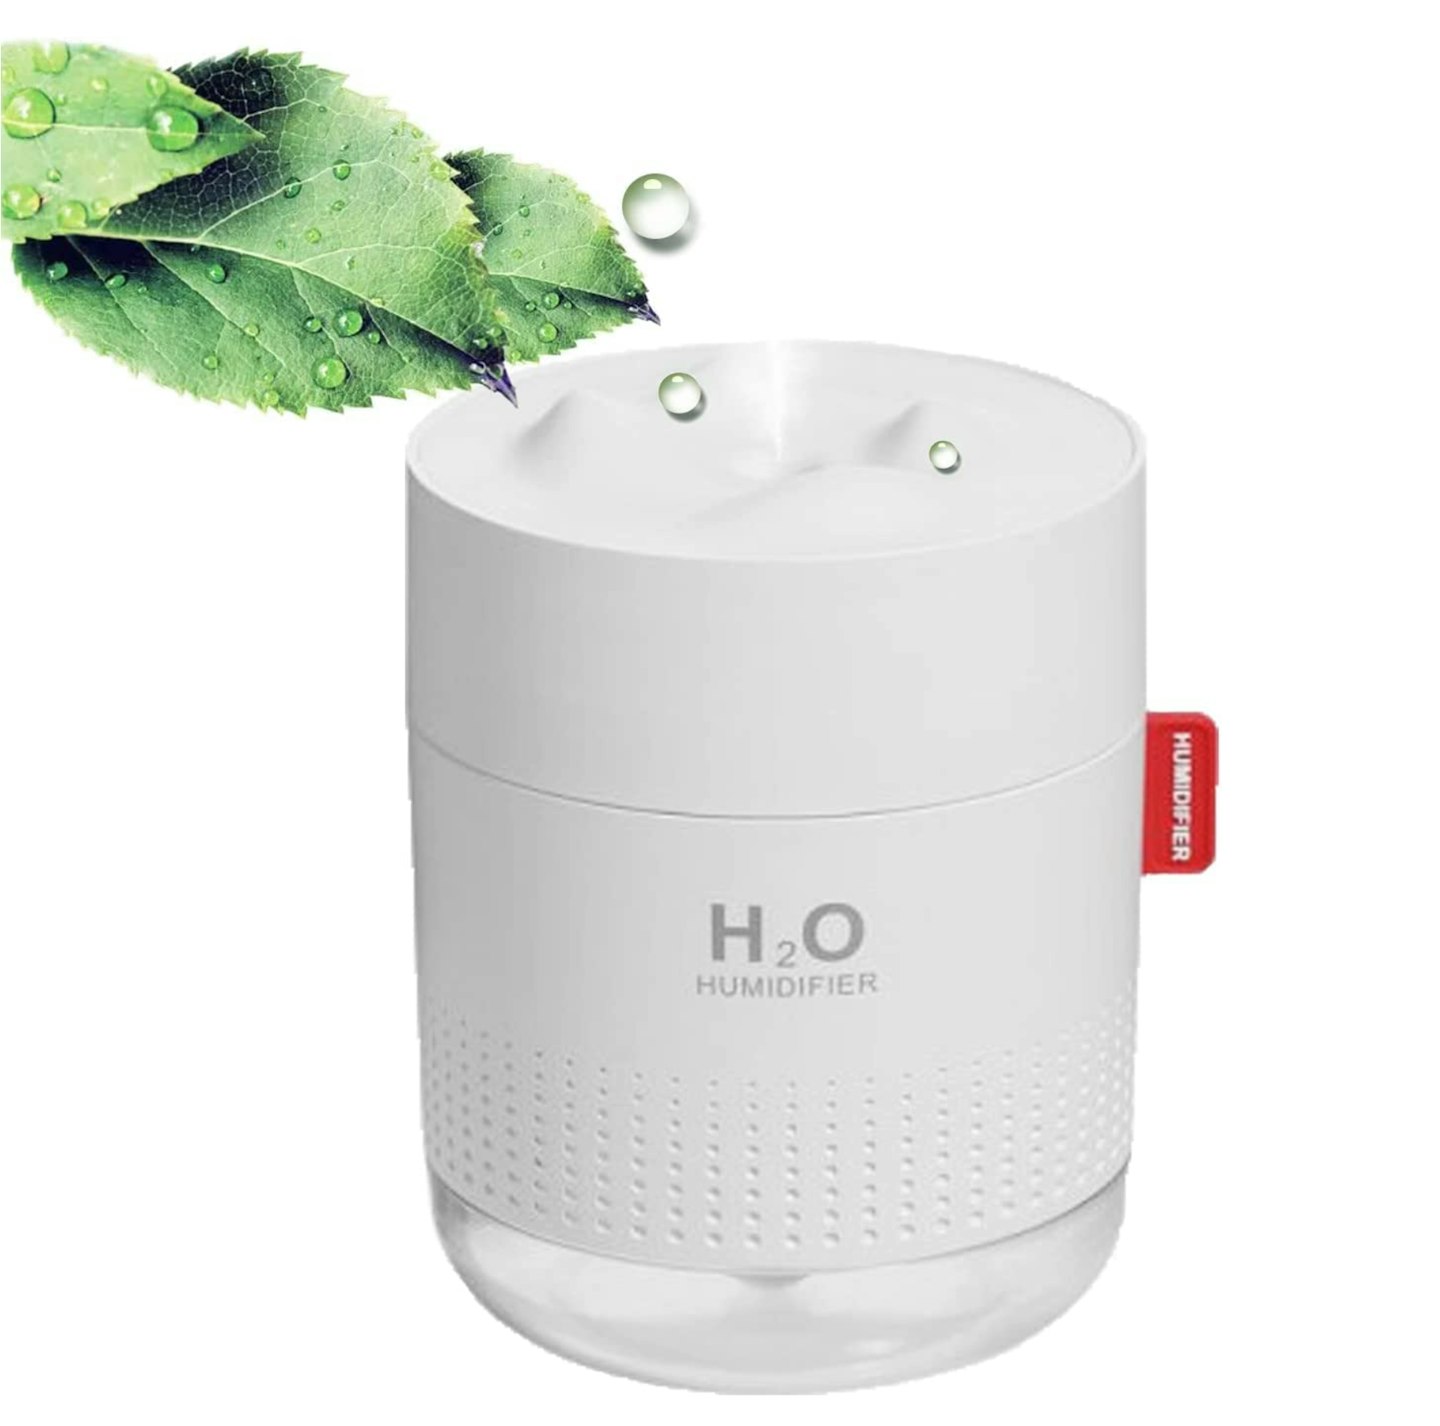 REONE Silent Portable Humidifier